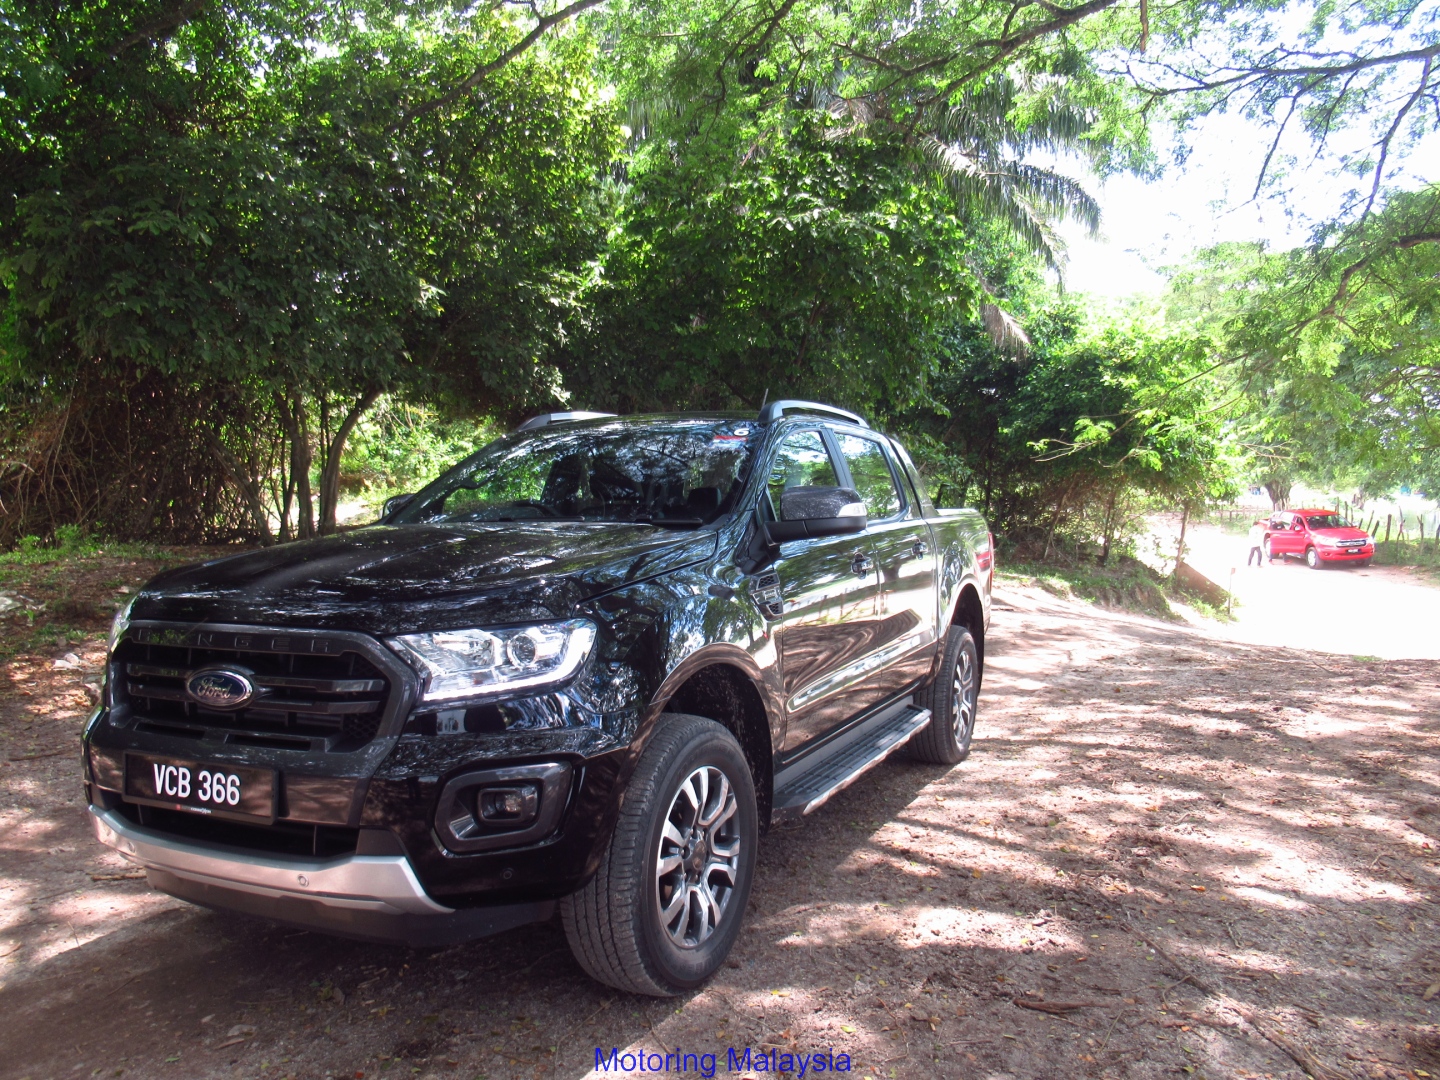 Motoring-Malaysia: First Drive Impressions: The New Ford Ranger ...